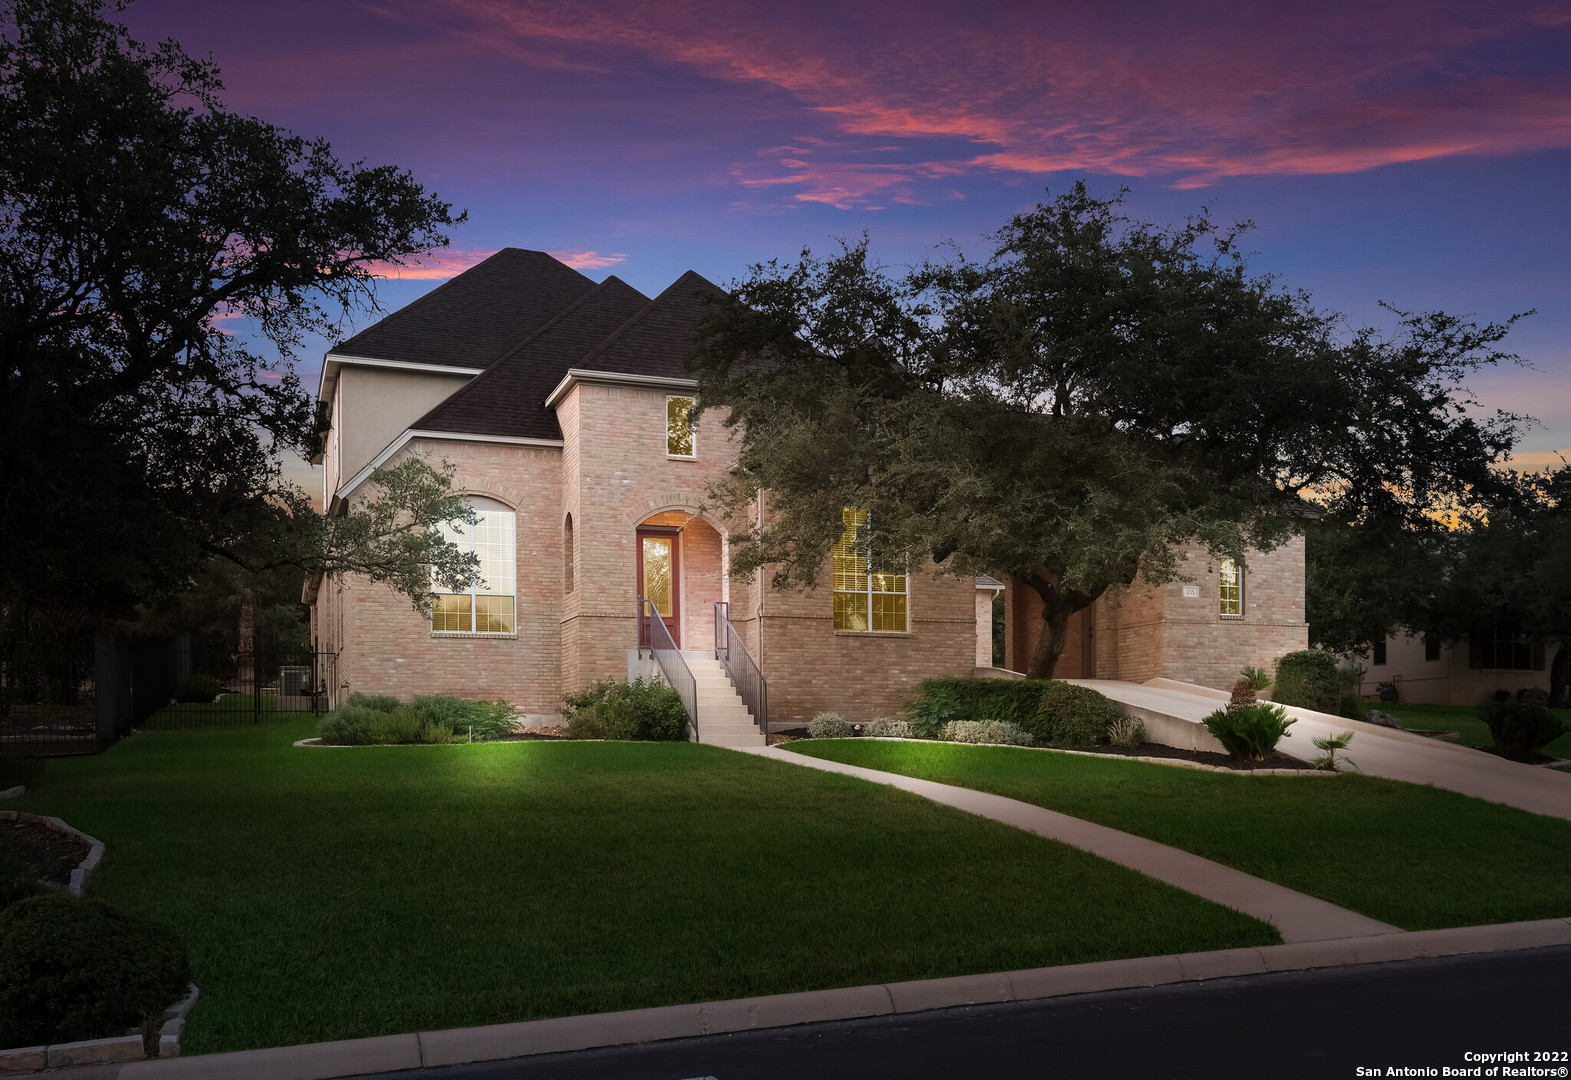 BRIGHT & BEAUTIFUL family home located in the prestigious 24/7 gated/guarded Summerglen community! 4/4.5 with 3,897 sf of spacious living nestled on a private, interior 1/2 acre lot. Stunning curb appeal with porte-cochere design - 3 car garage. Top Rated NEISD Schools. Relax & enjoy an entertainer's backyard dream, stunning Keith Zars Ozone pool, wrought iron fence, expansive covered patio & outdoor kitchen! A chef's kitchen with a large island, granite counters and stainless steel appliances is the heart of this home. The kitchen opens to a spacious family room w/gas fireplace. A separate dining room, living room, breakfast area, private office (potential 5th bedroom) with full en-suite bath, master bedroom/bathroom, SOARING ceilings, an abundance of natural light, gorgeous window views, architectural details, hardwood and tile floors as well as newly installed carpet are all on the first floor. Upstairs find newly installed Pella windows and carpet throughout, a game room, and three large secondary bedrooms.  This is a wonderful home in a great location with easy access in and out of the neighborhood. Pride of ownership can be felt and seen!